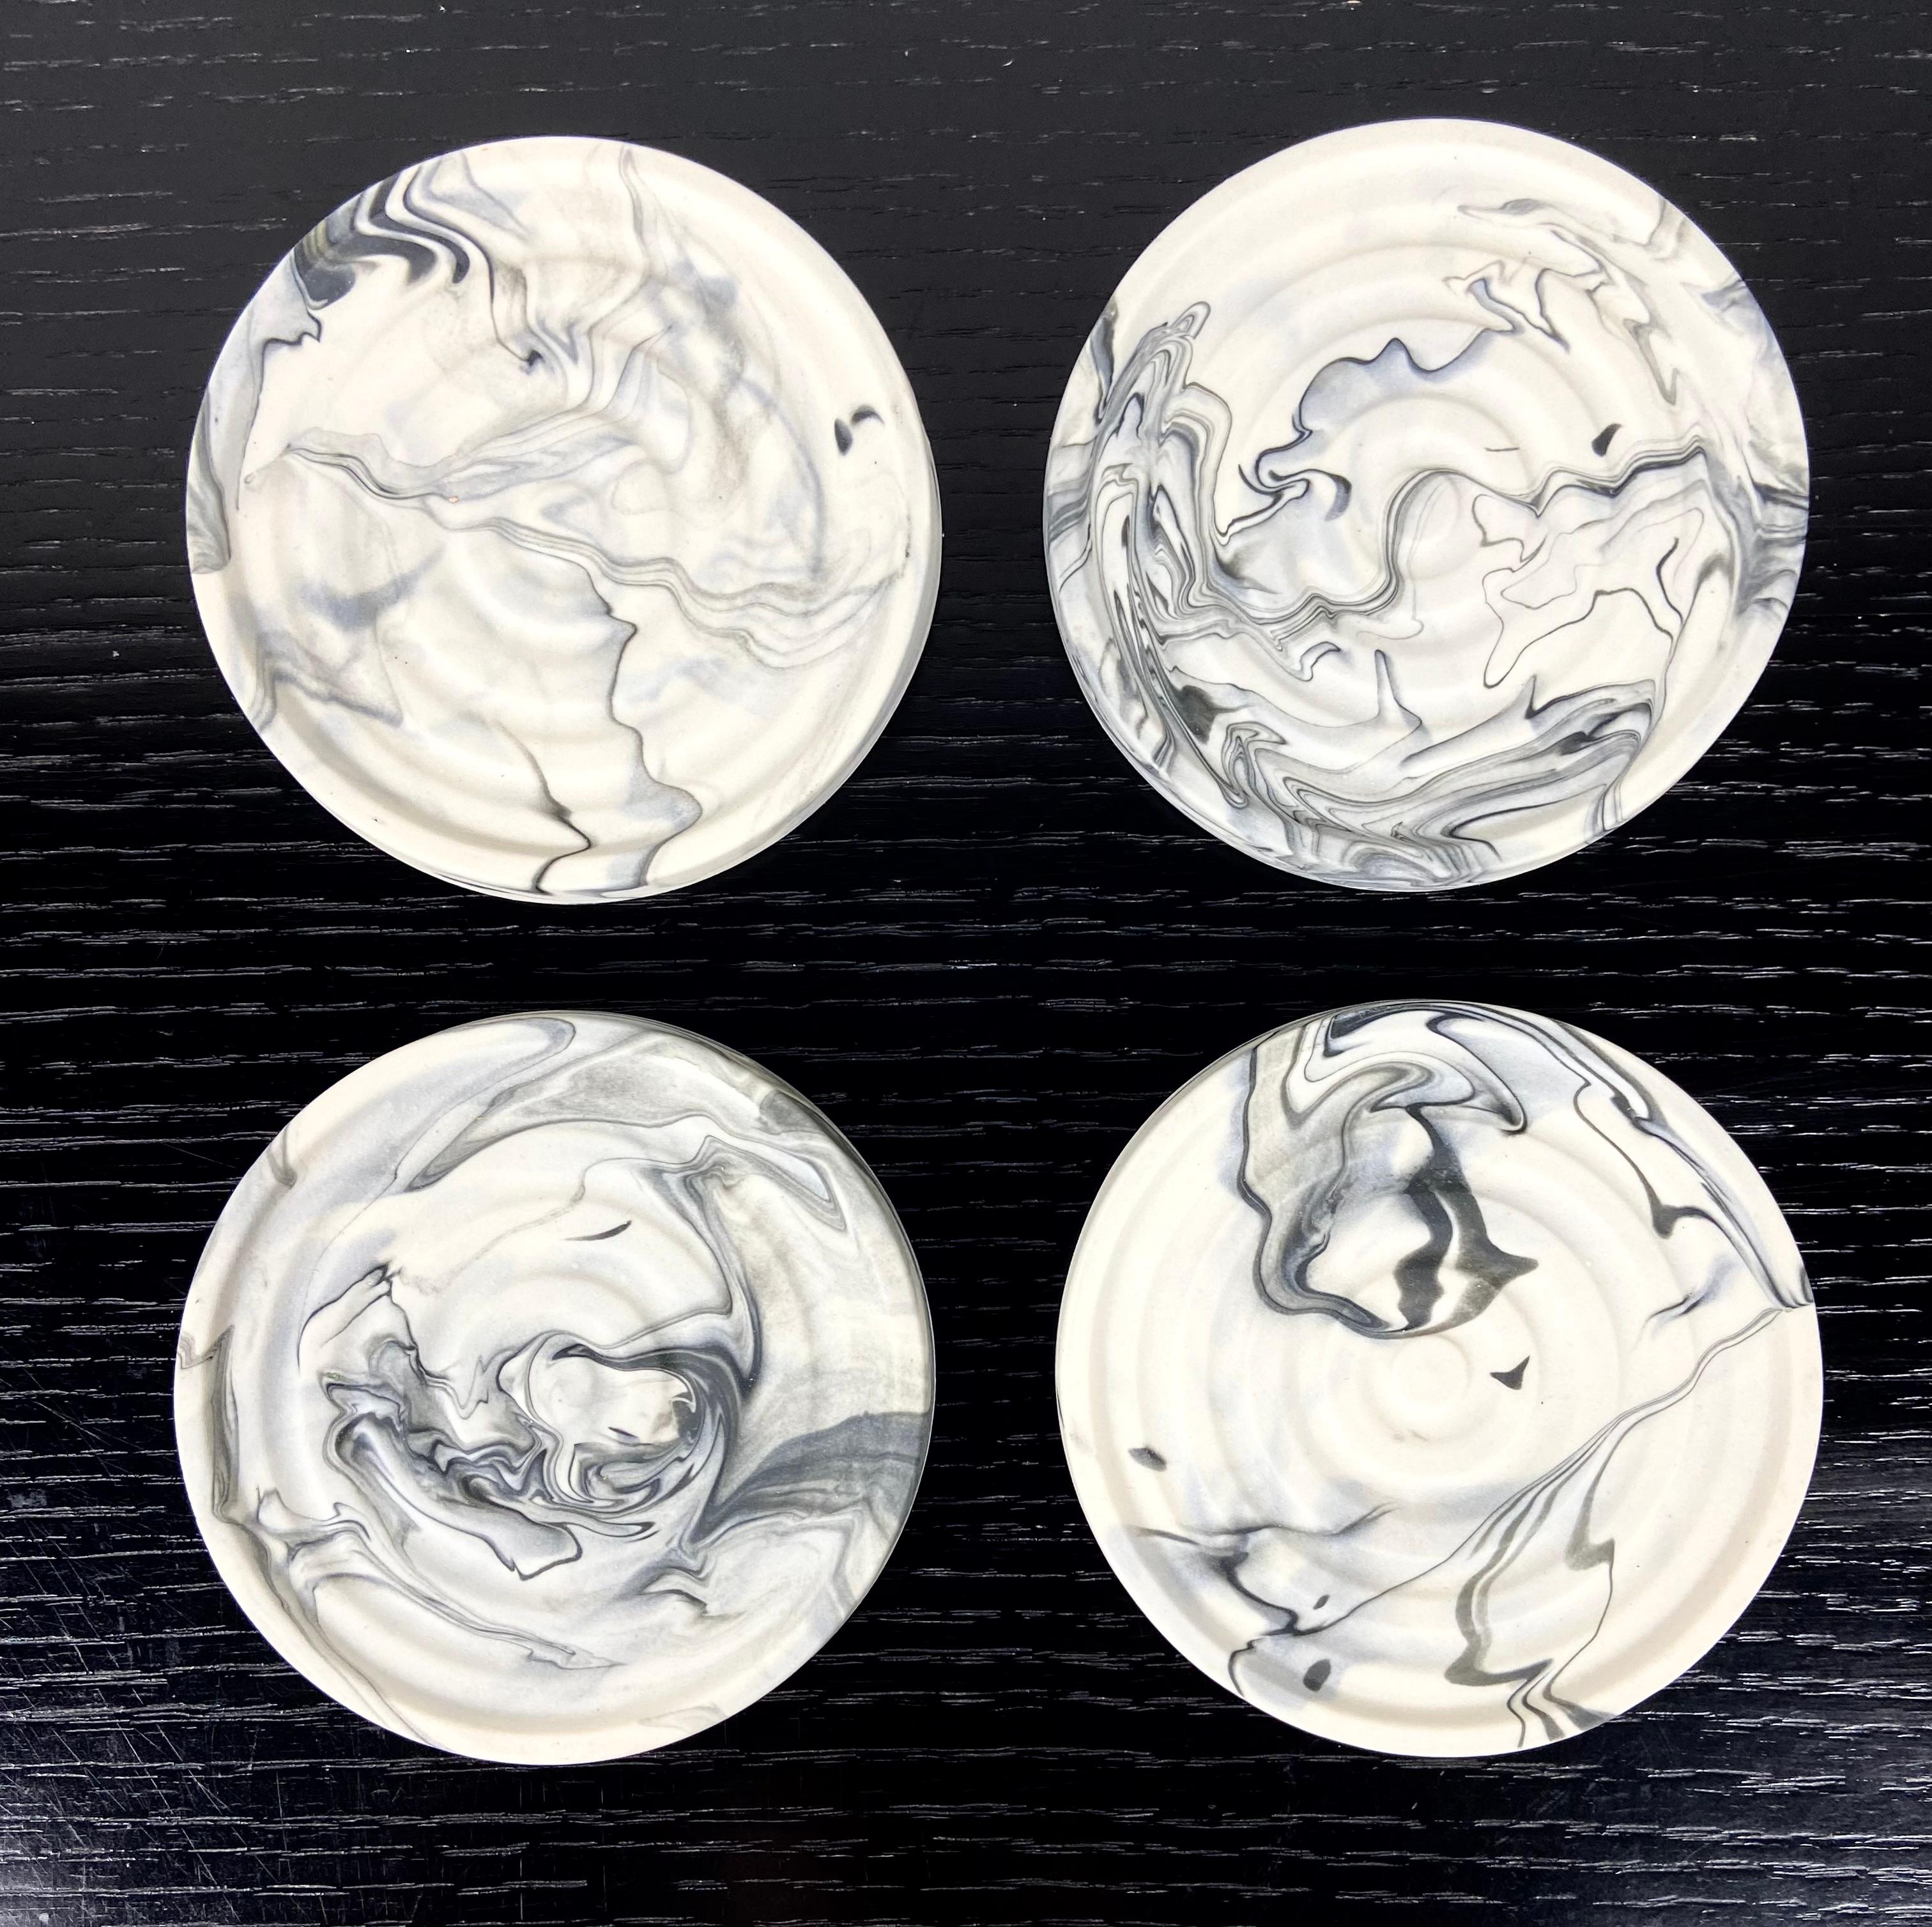 A set of 4 marbleized porcelain coasters by Upstate NY ceramist Andrew Molleur. Each coaster has a different pattern. Please note that your set will have variations and may not be exactly as pictured in terms of the patterns.  Each coaster is hand